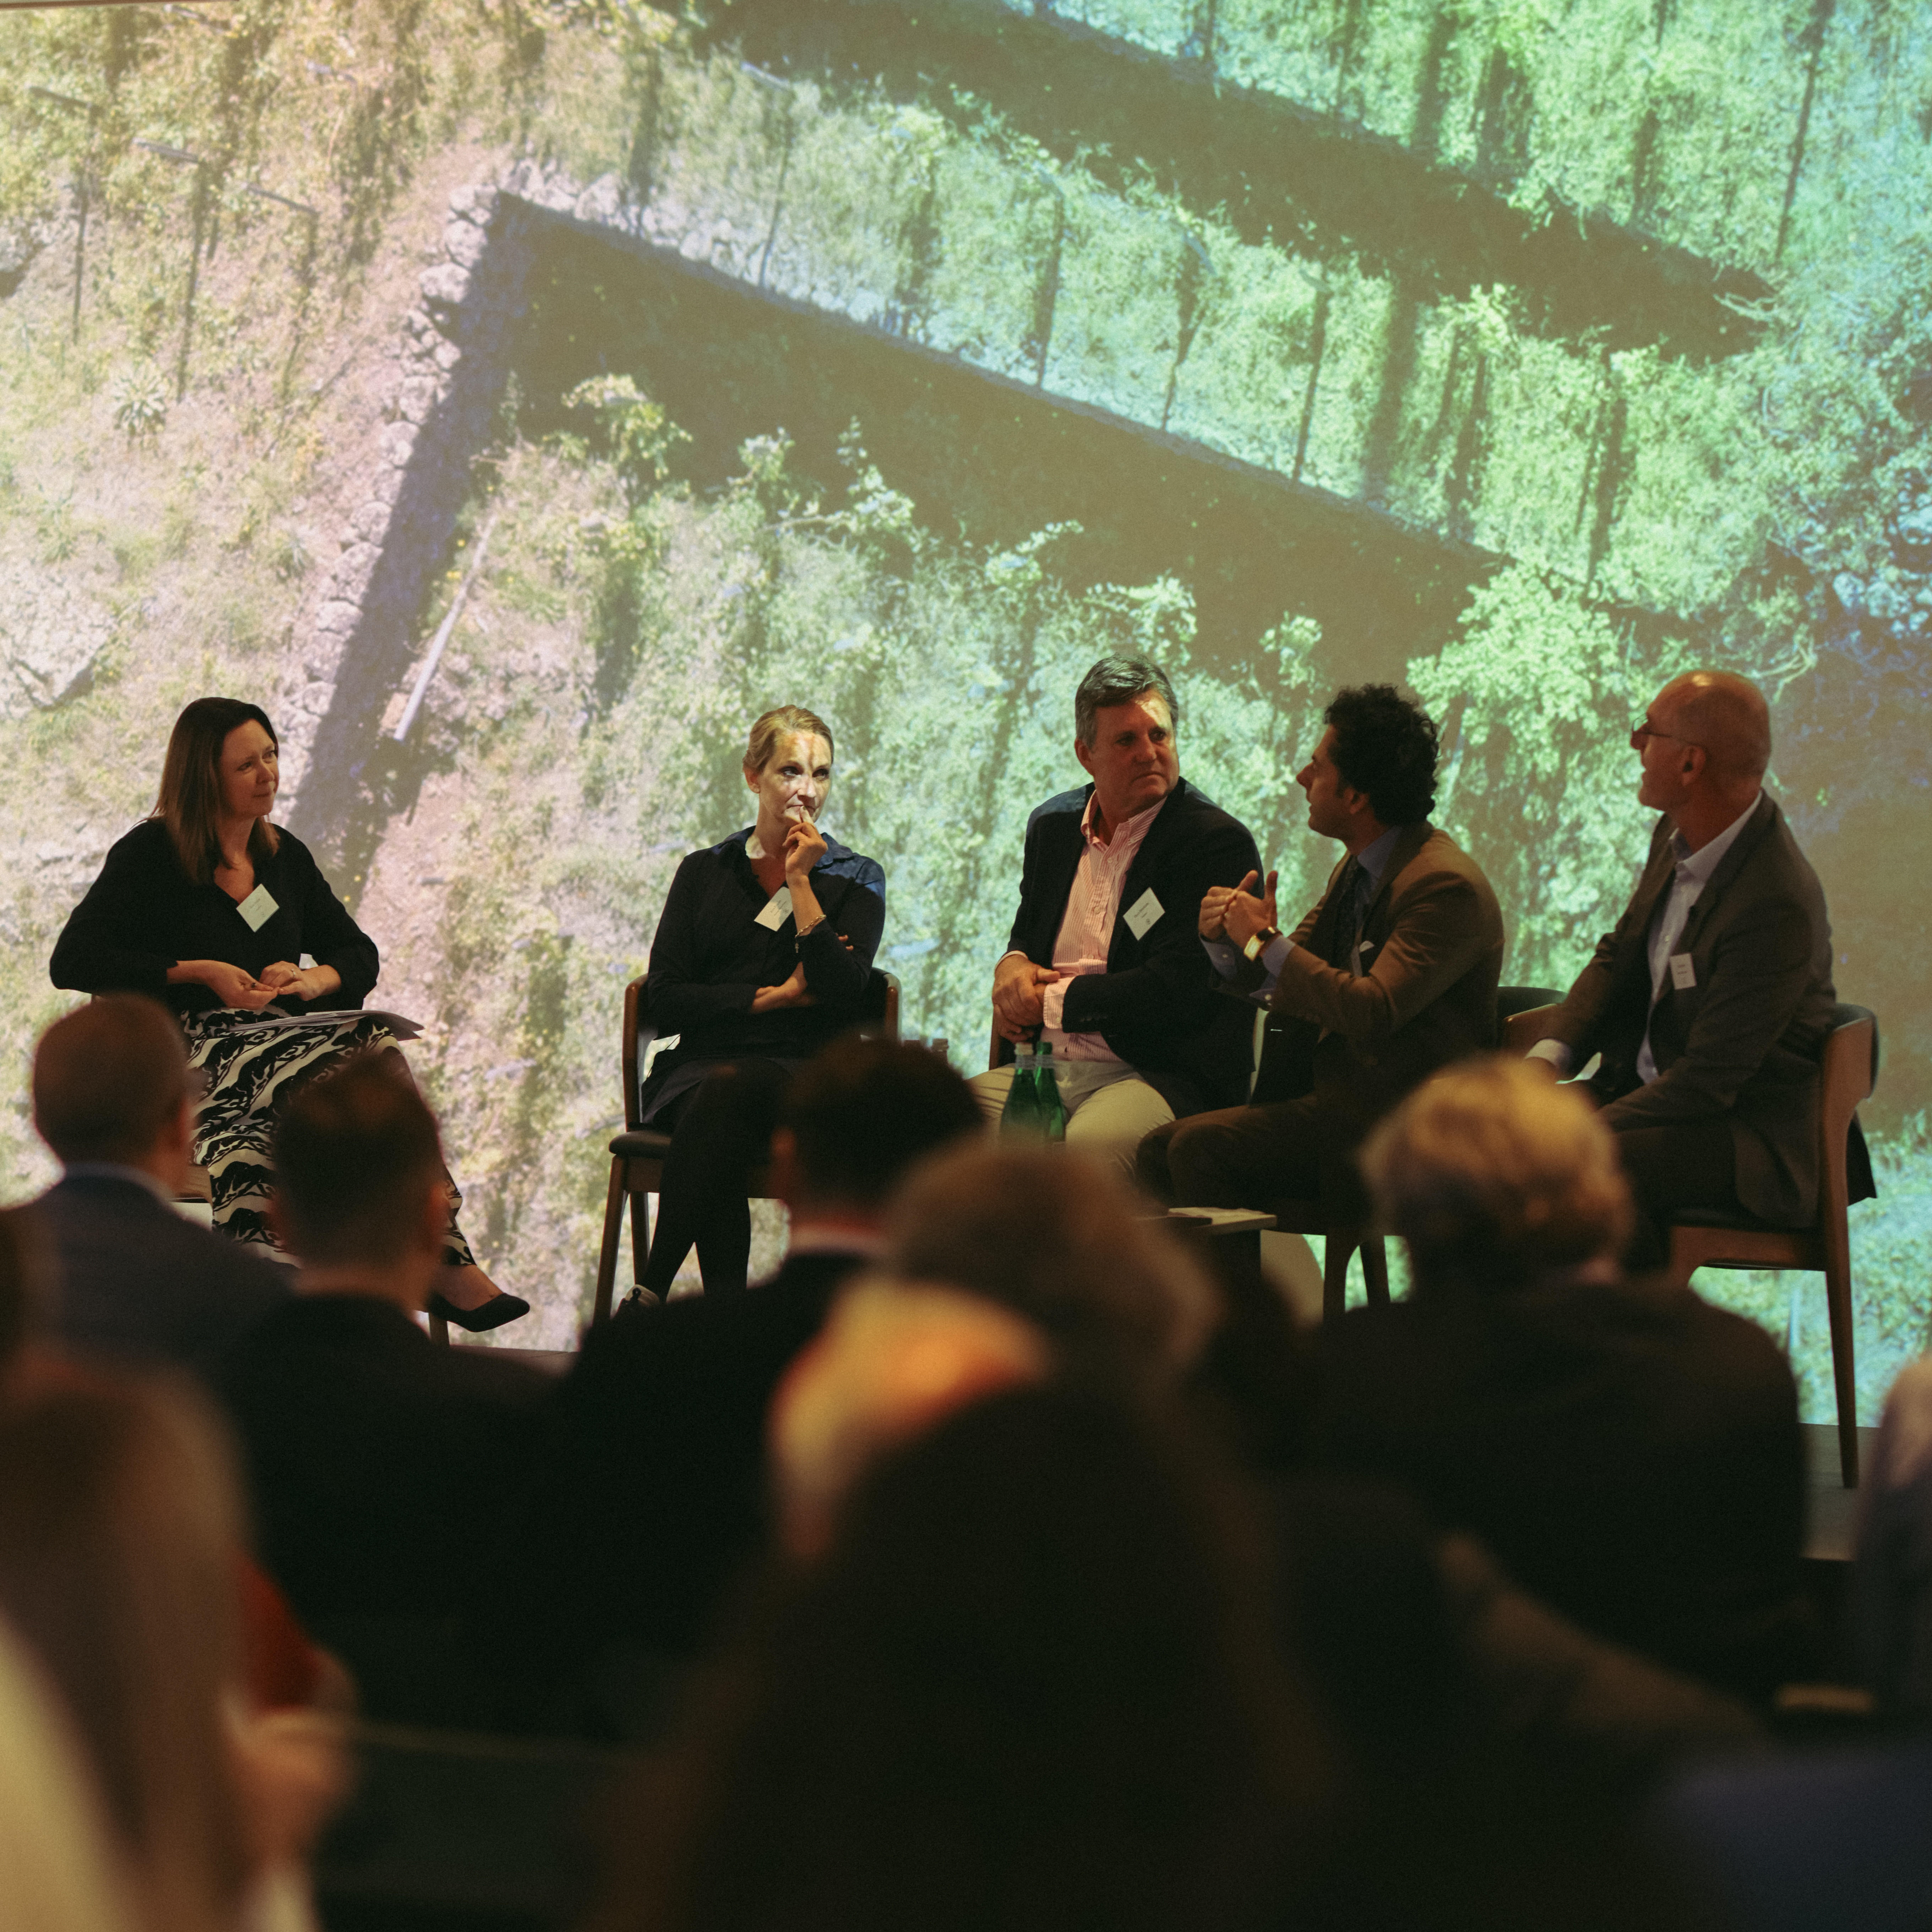 Host Jane Anson with our guests on stage at our inaugural Sustainability Forum in the BAFTA building. To Jane's right, the four guests are seated: Eva Fricke, Dean Hewitson, Alberto Graci (who is speaking) and Eric Kohler.